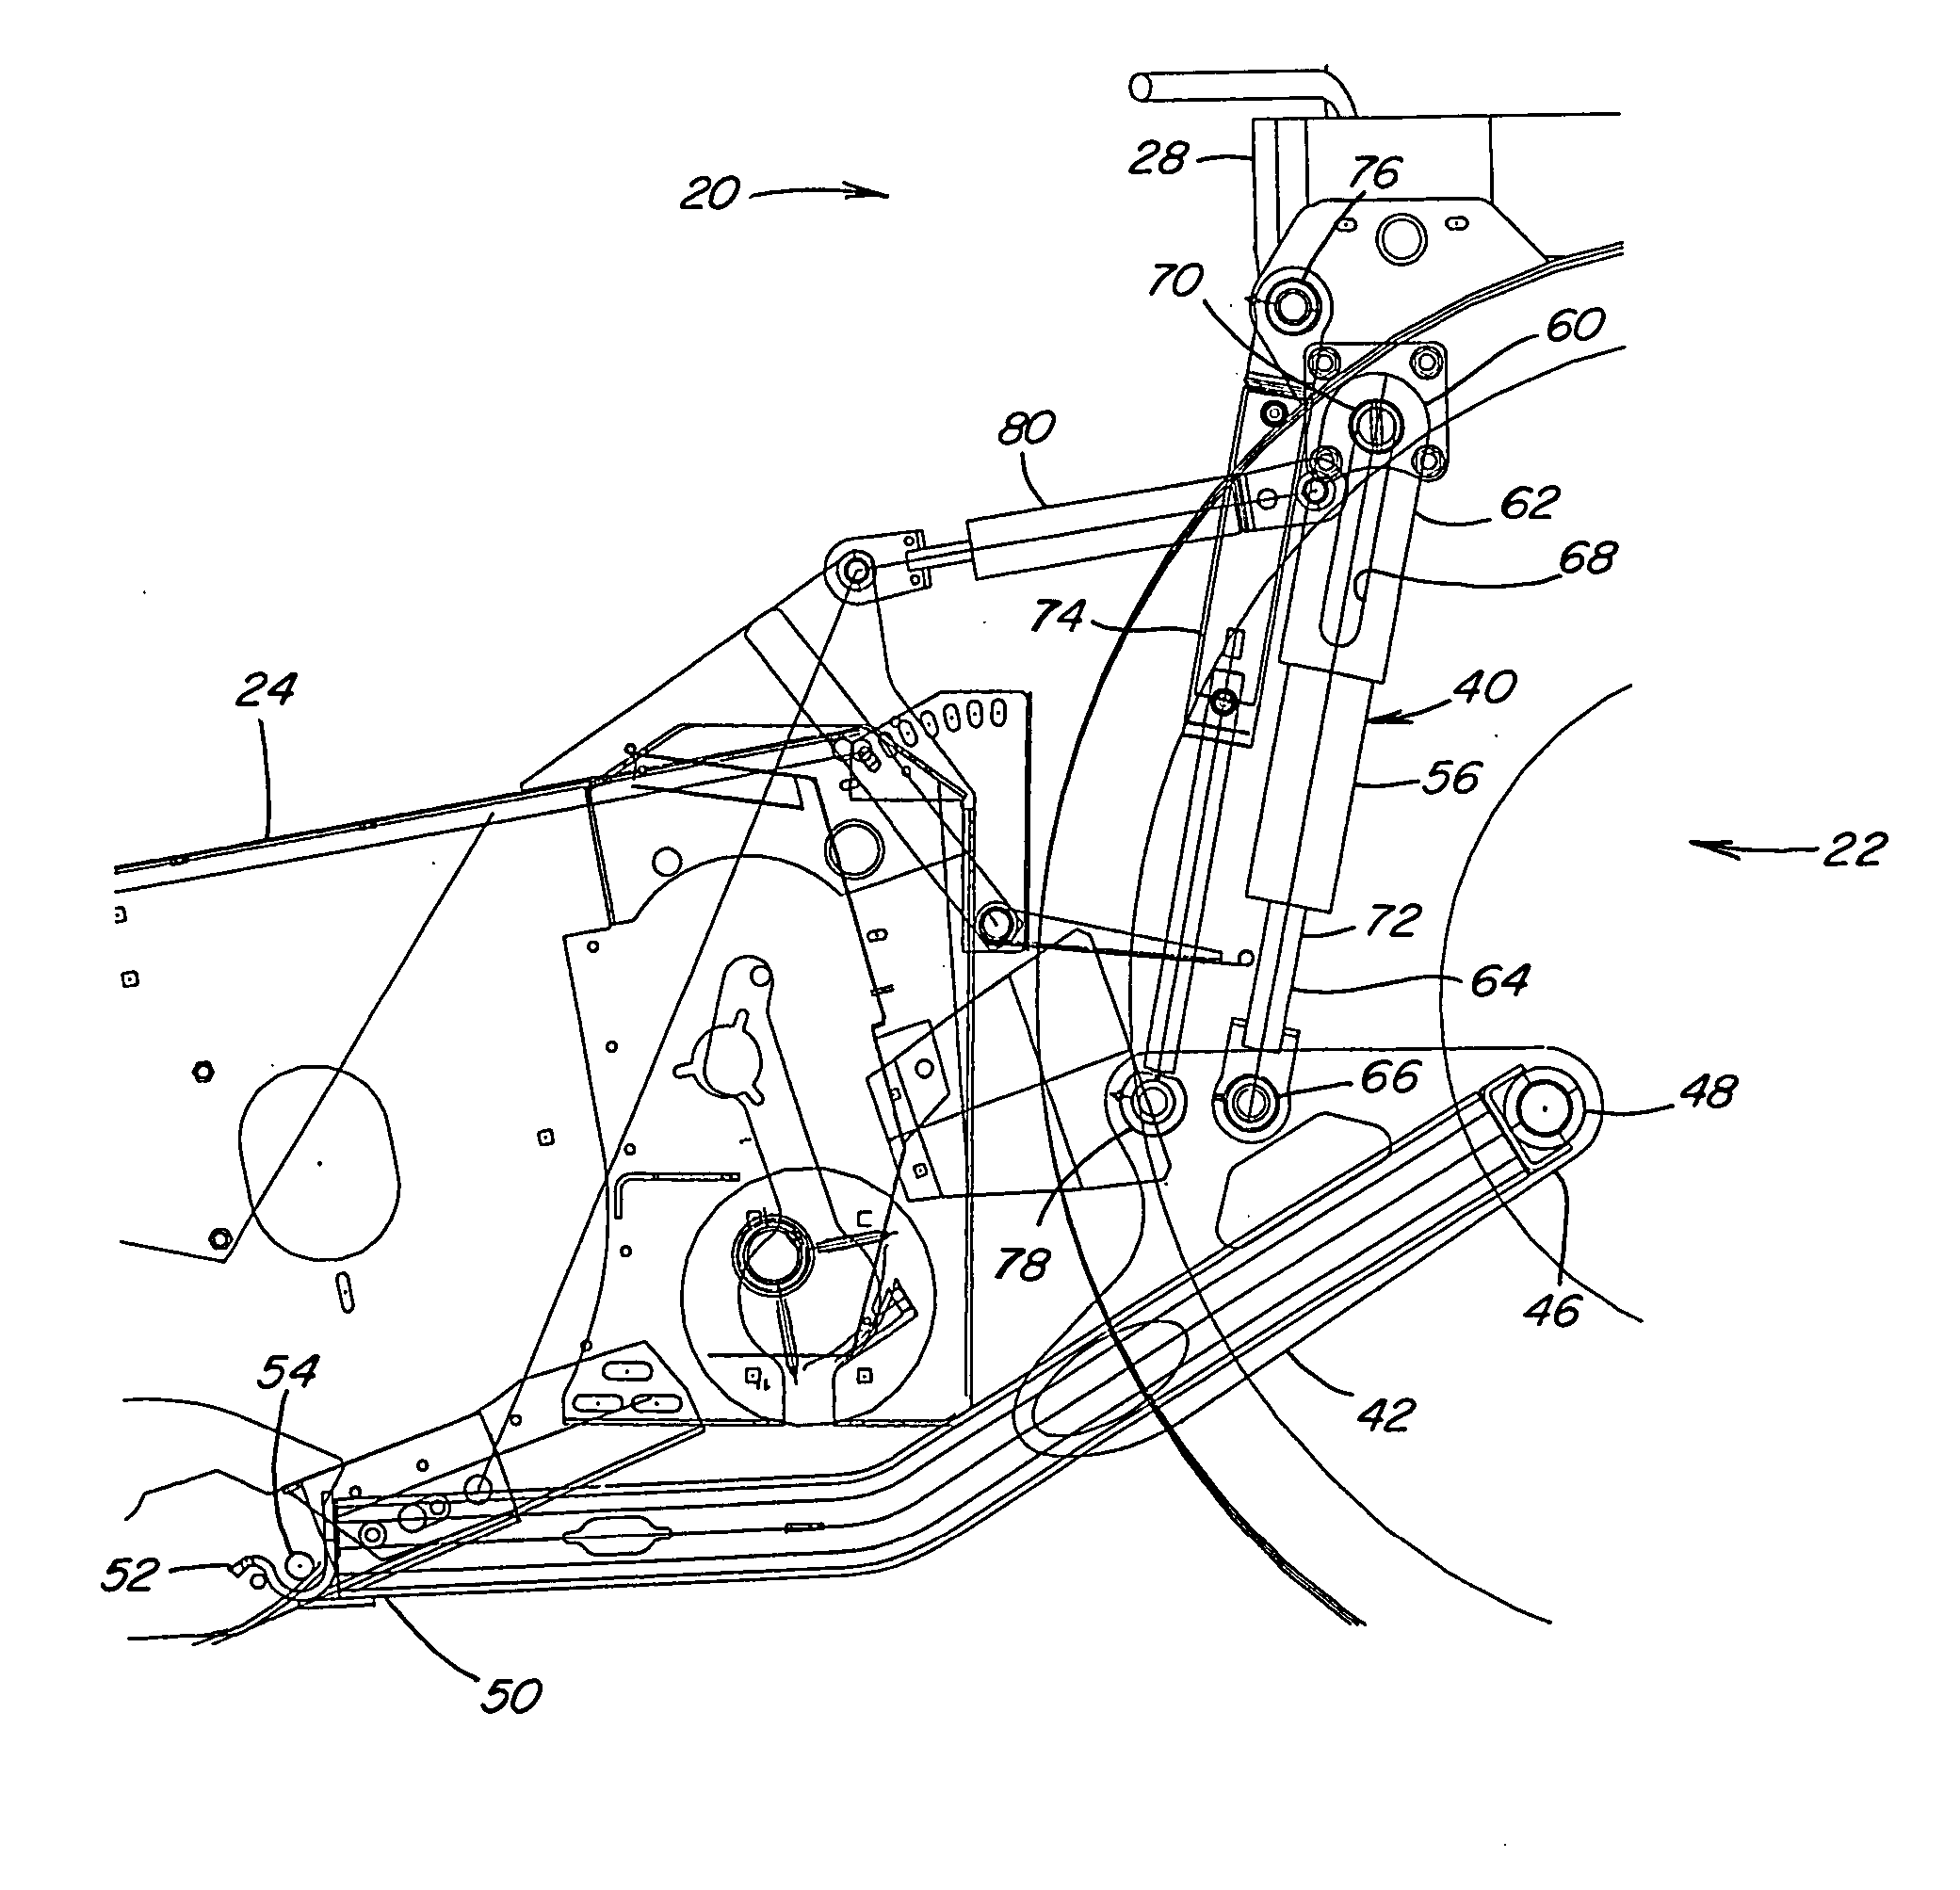 Header height control system and apparatus